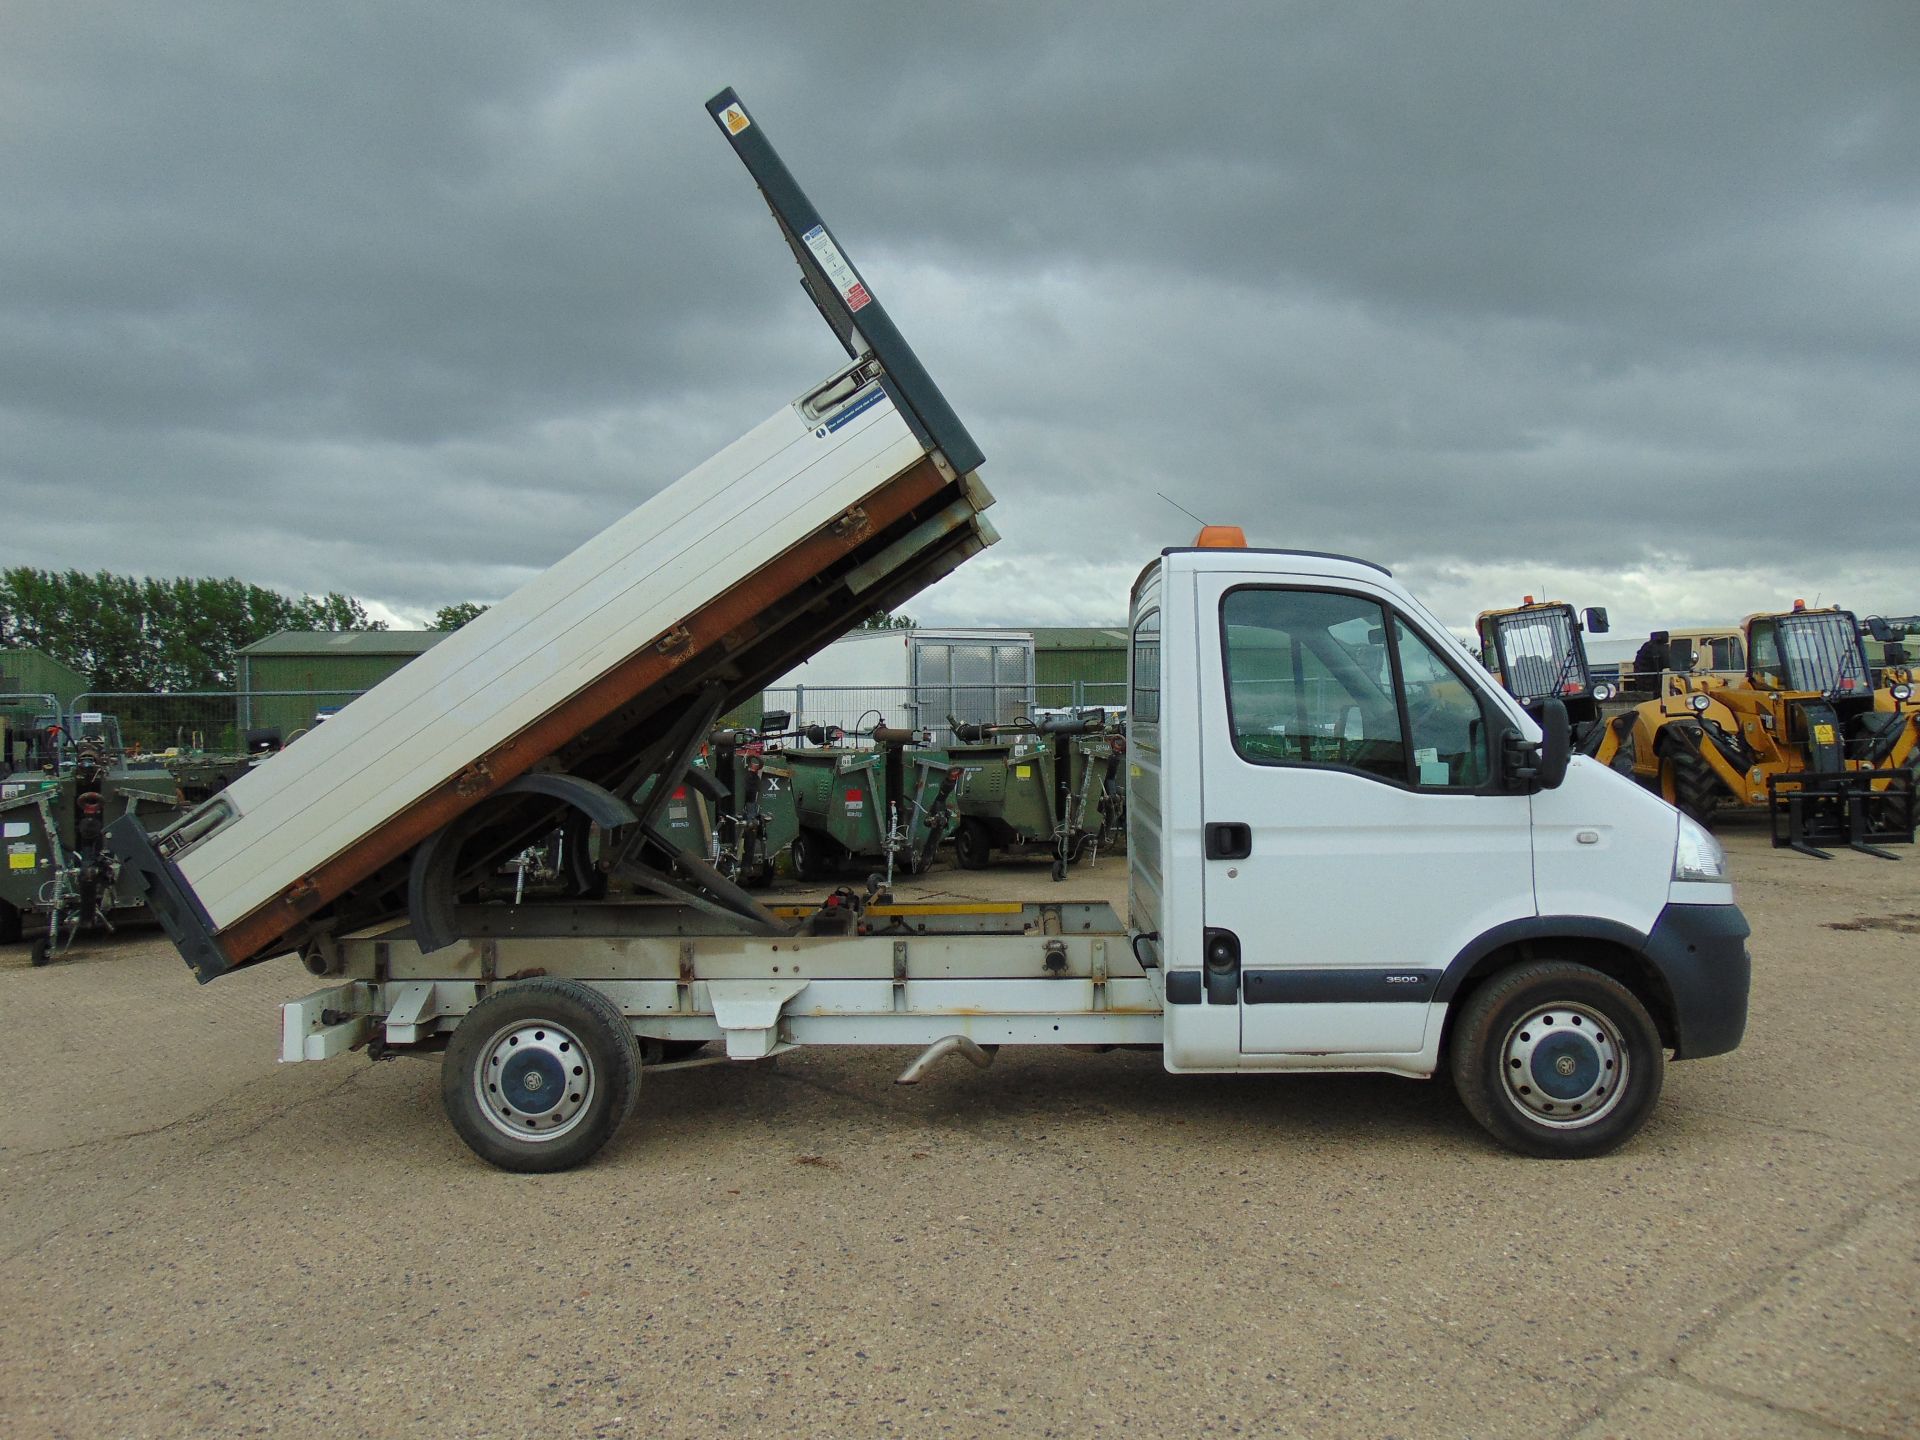 2010 Vauxhall Movano 3500 2.5 CDTi MWB Flat Bed Tipper - Image 7 of 15